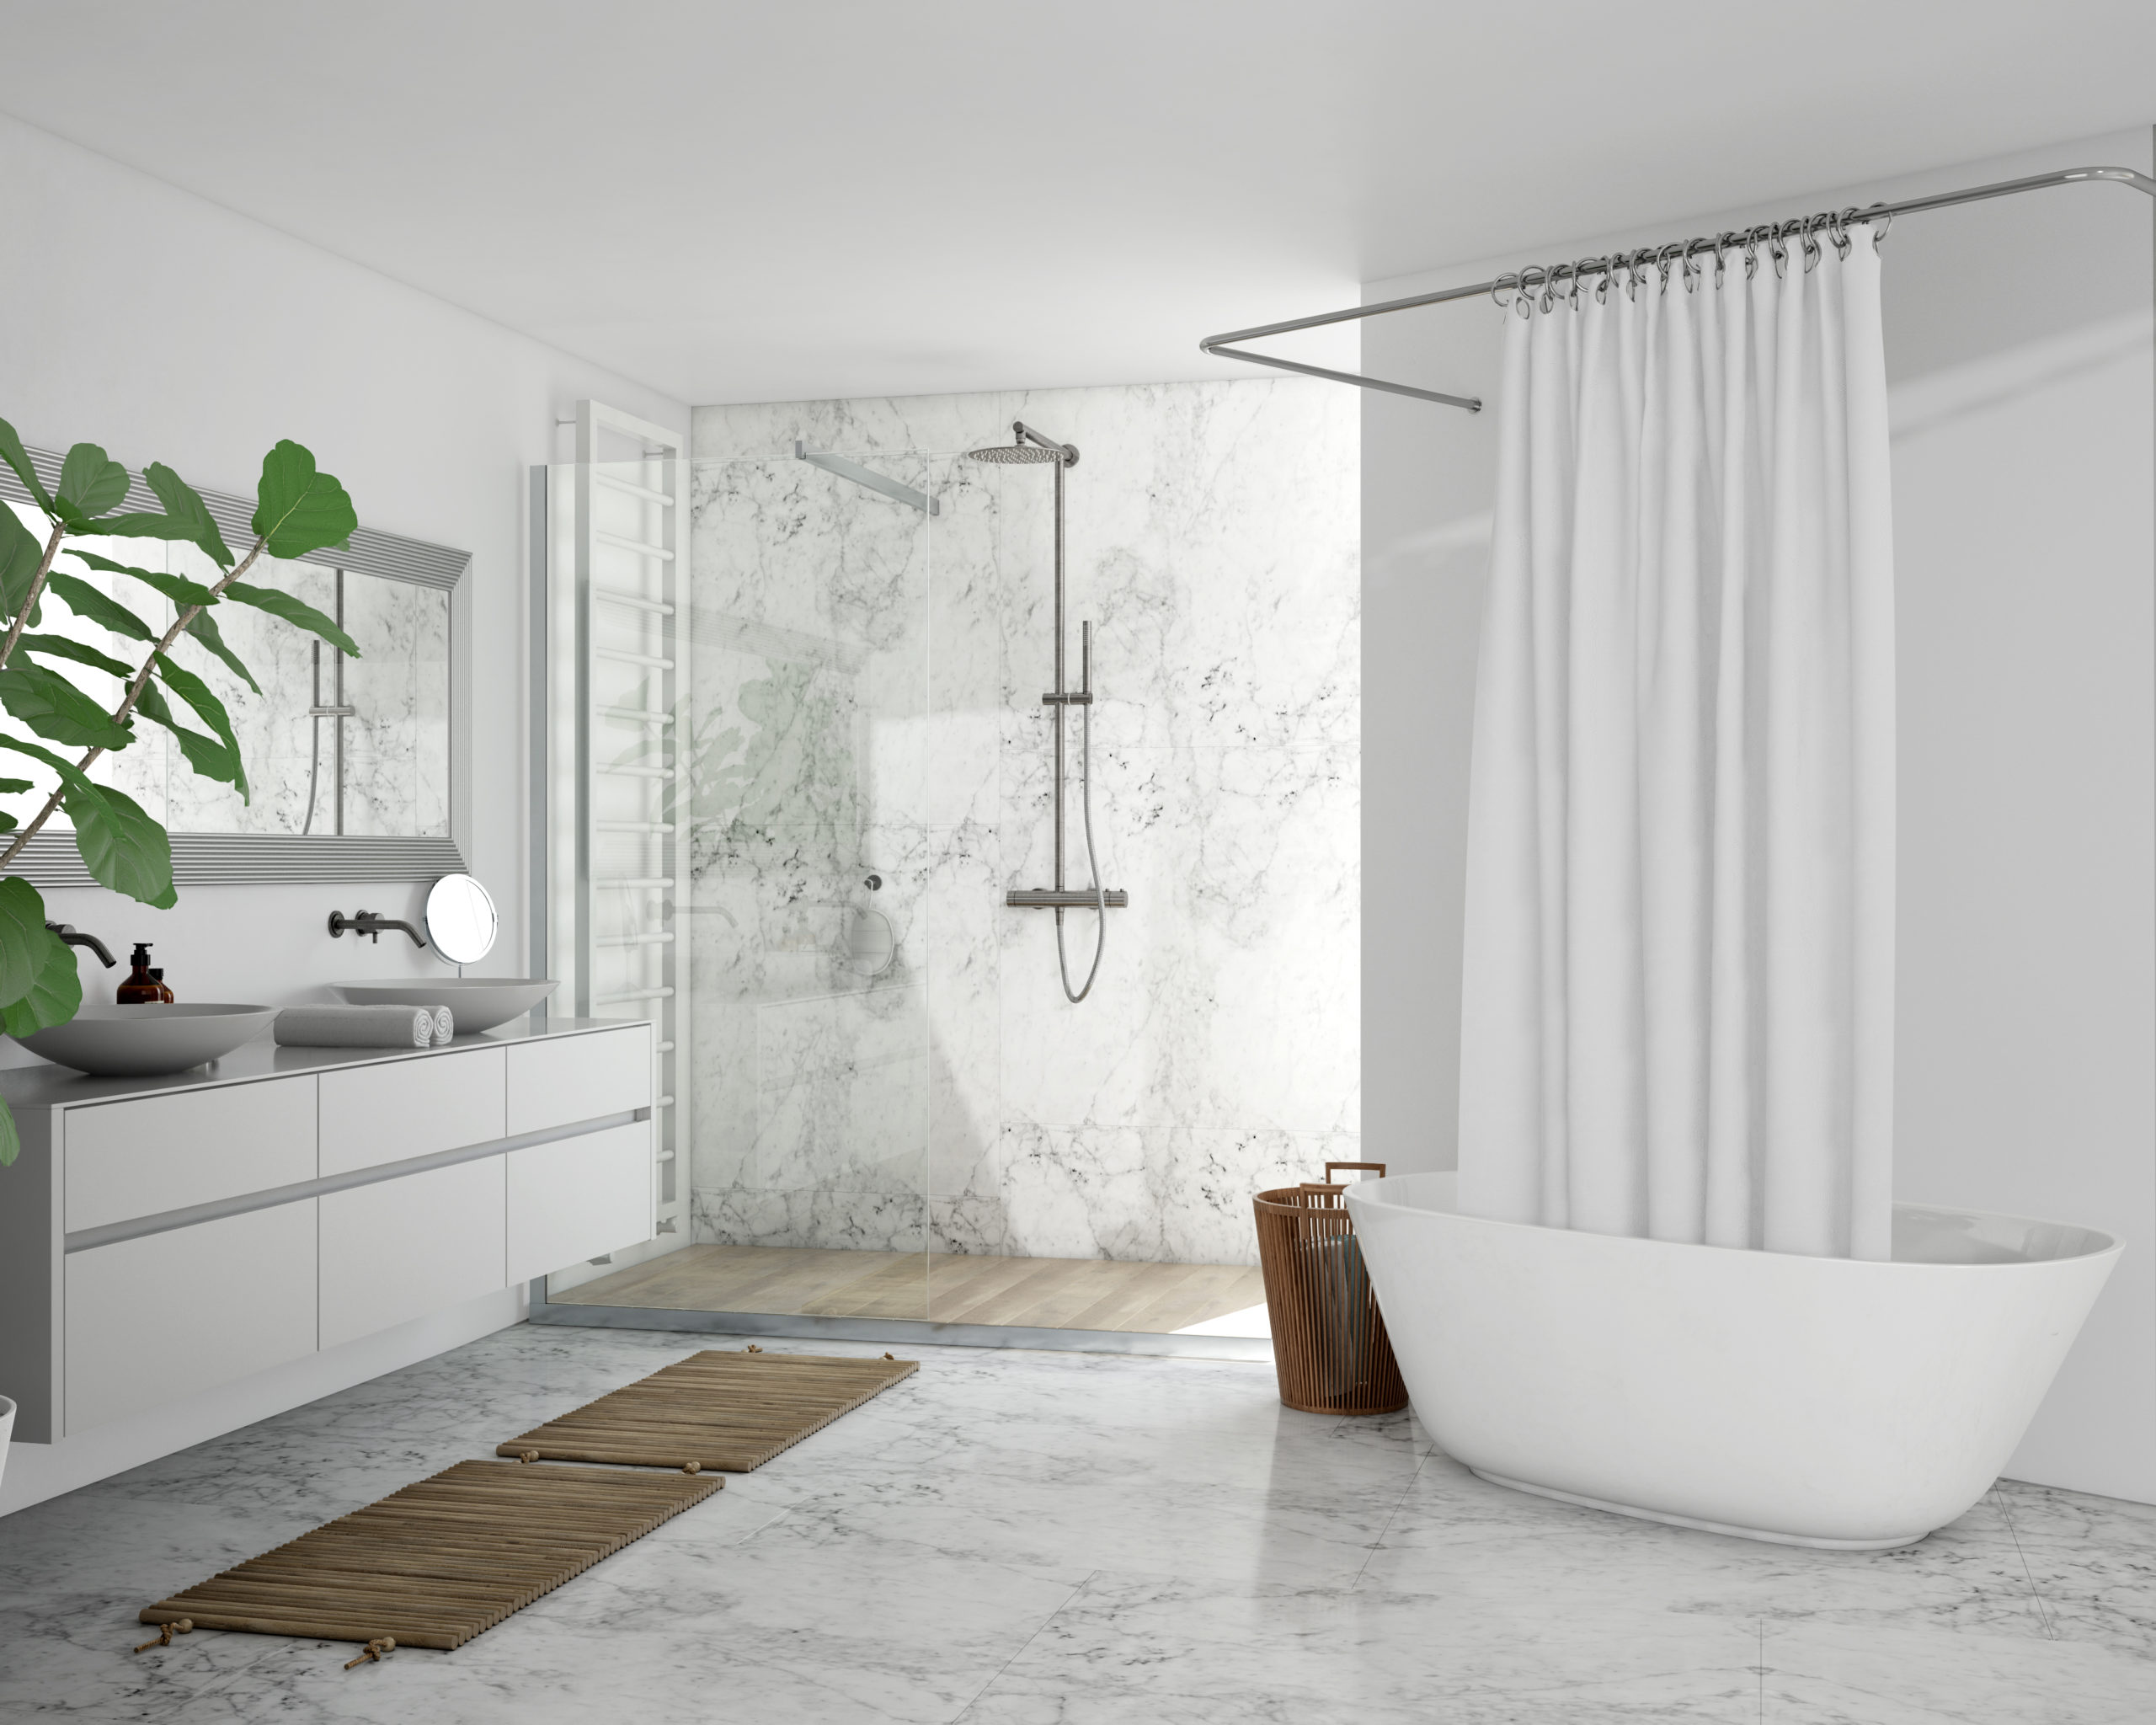 Top 4 Benefits Why You Should Go For Bathroom Renovation